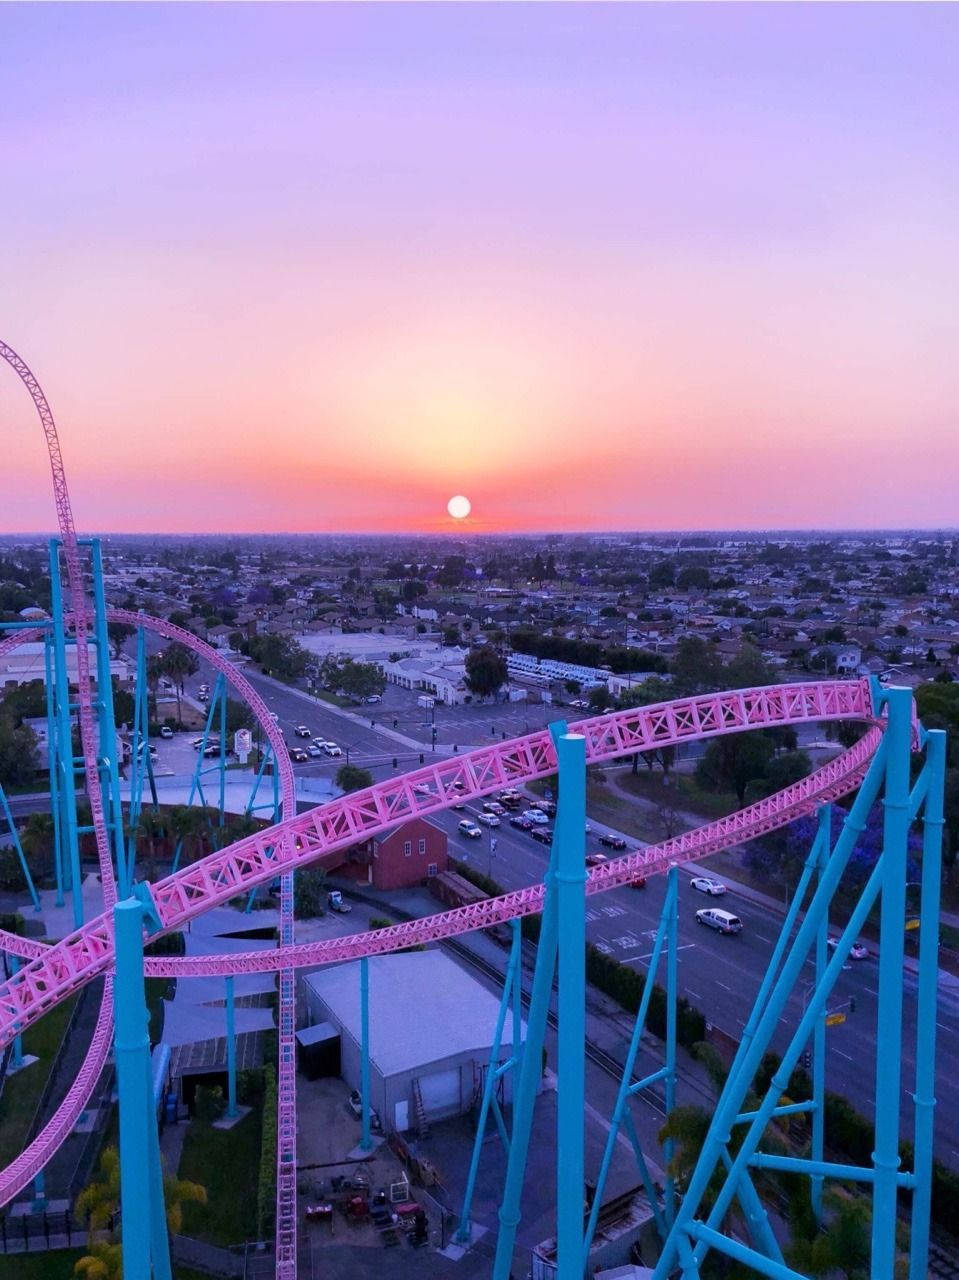 Roller Coaster By The Sunset Background